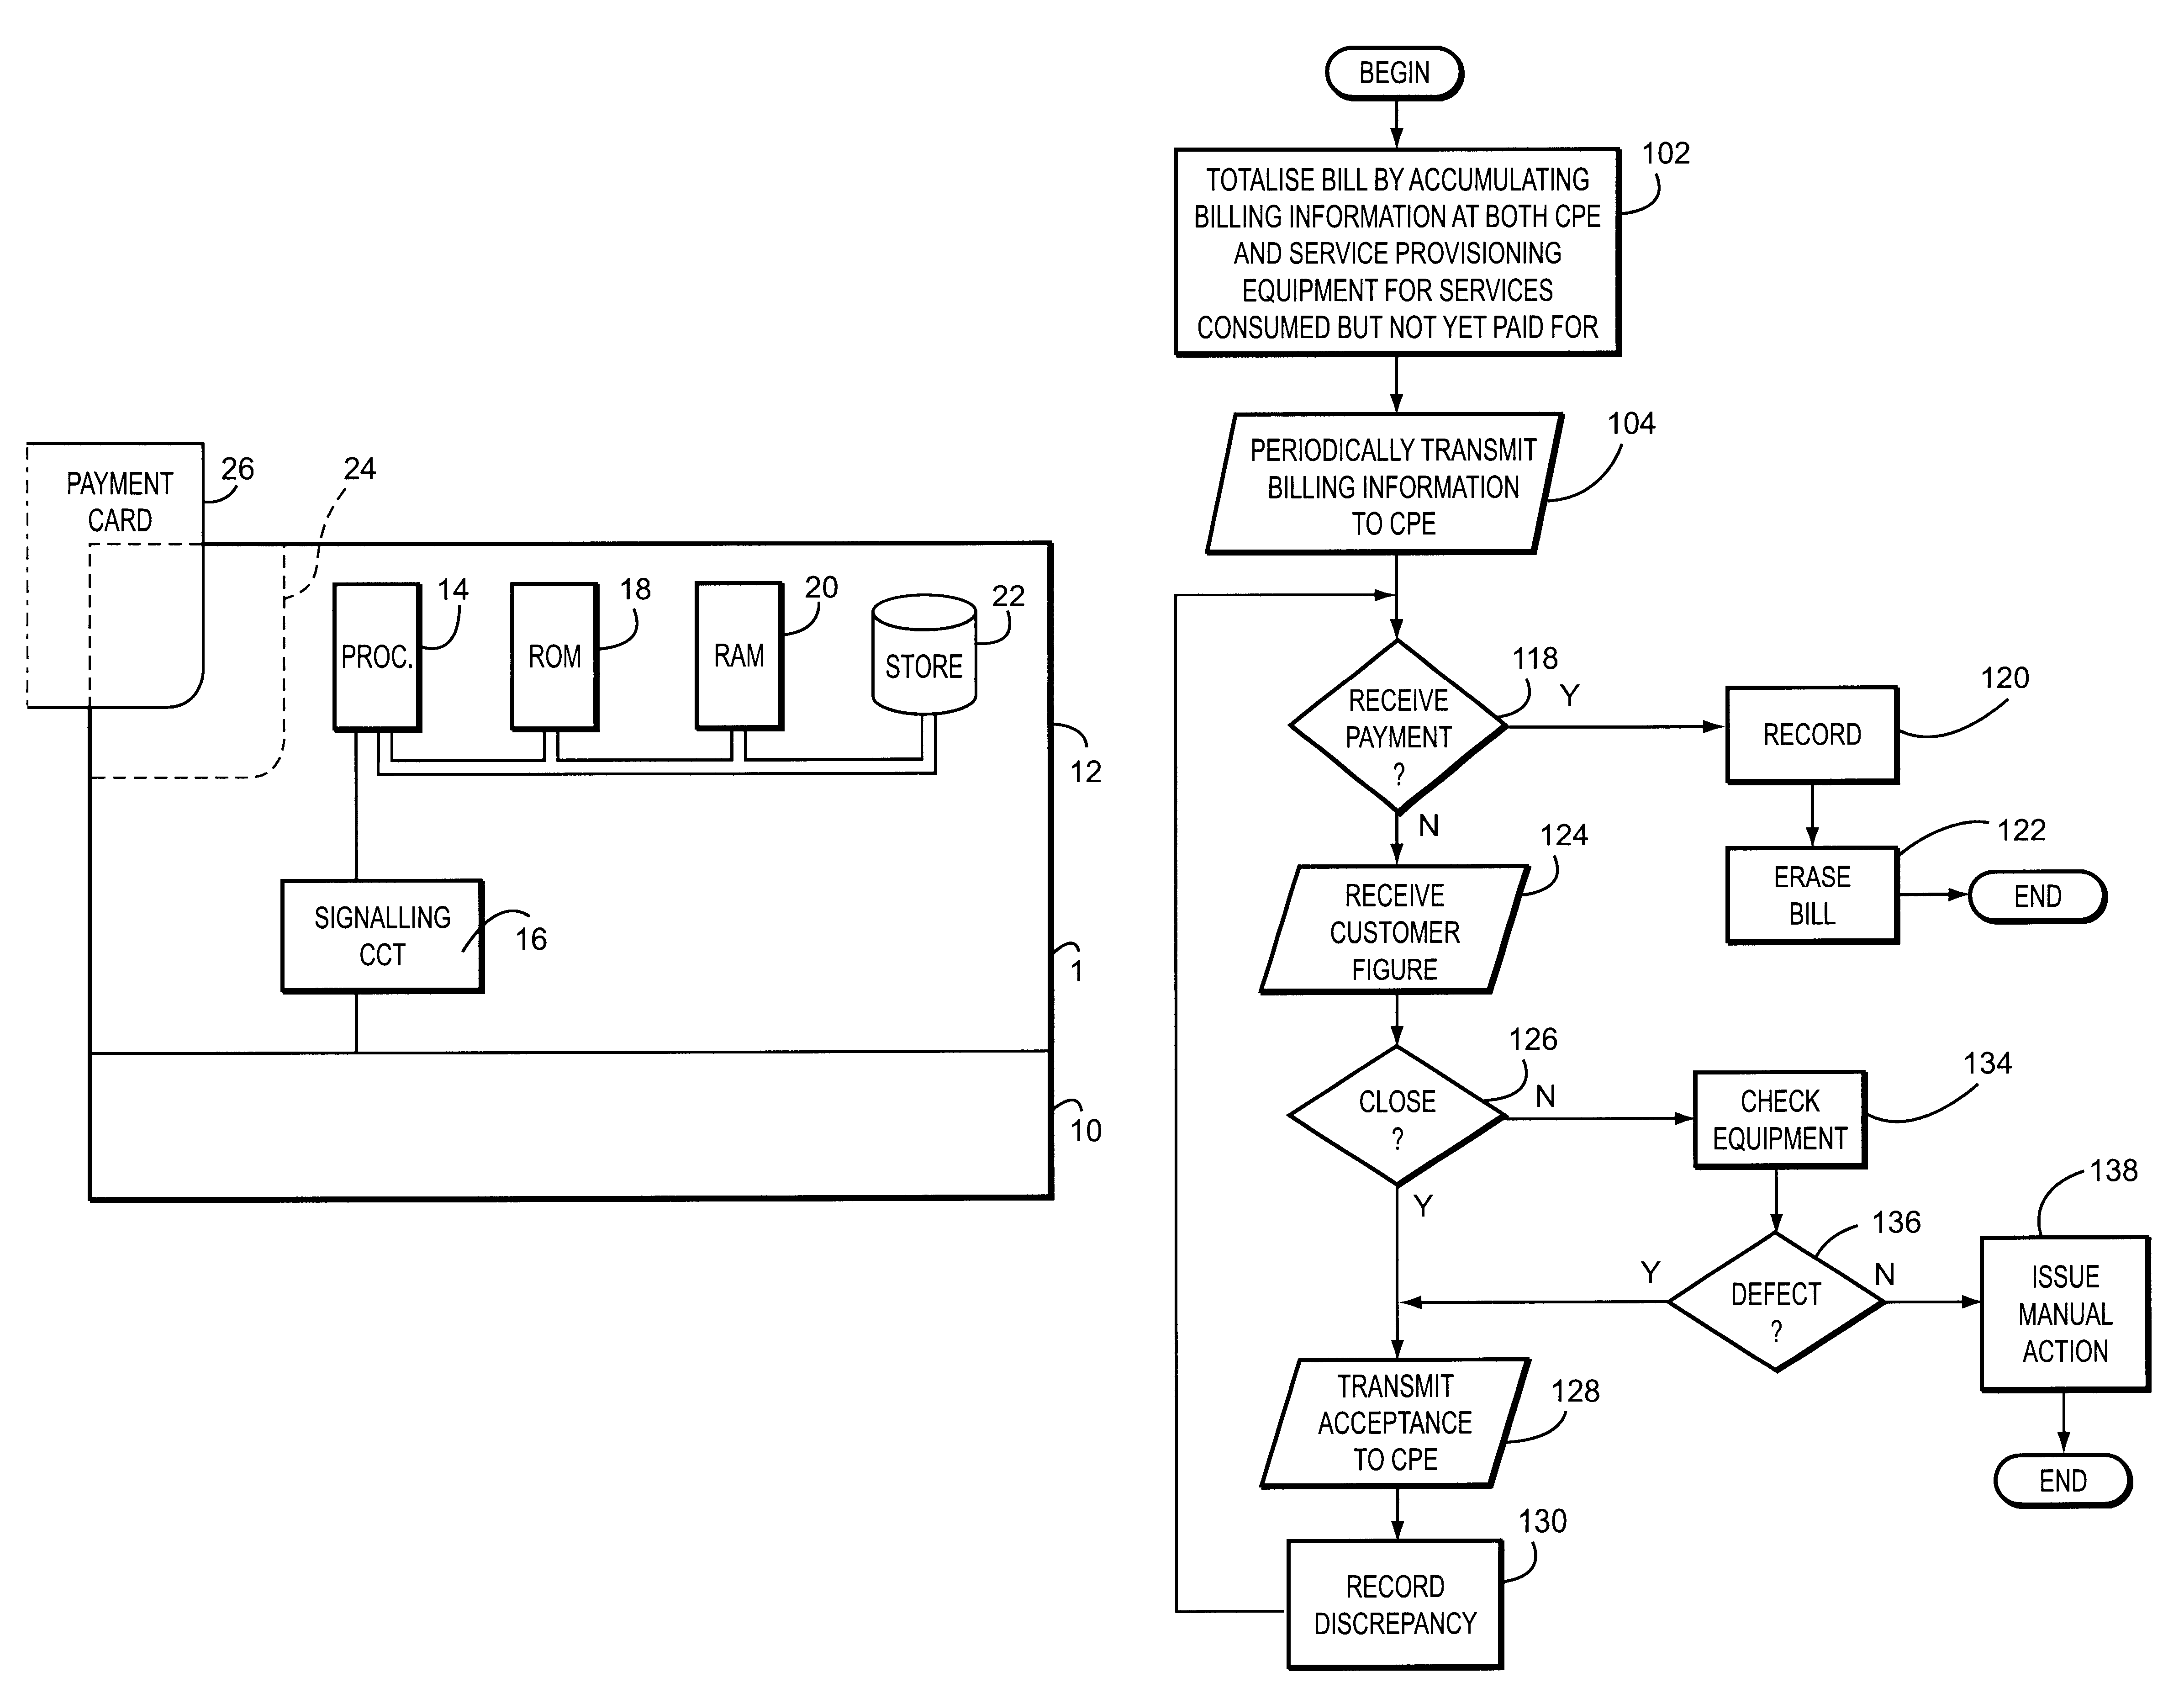 Accounting system in a communication network